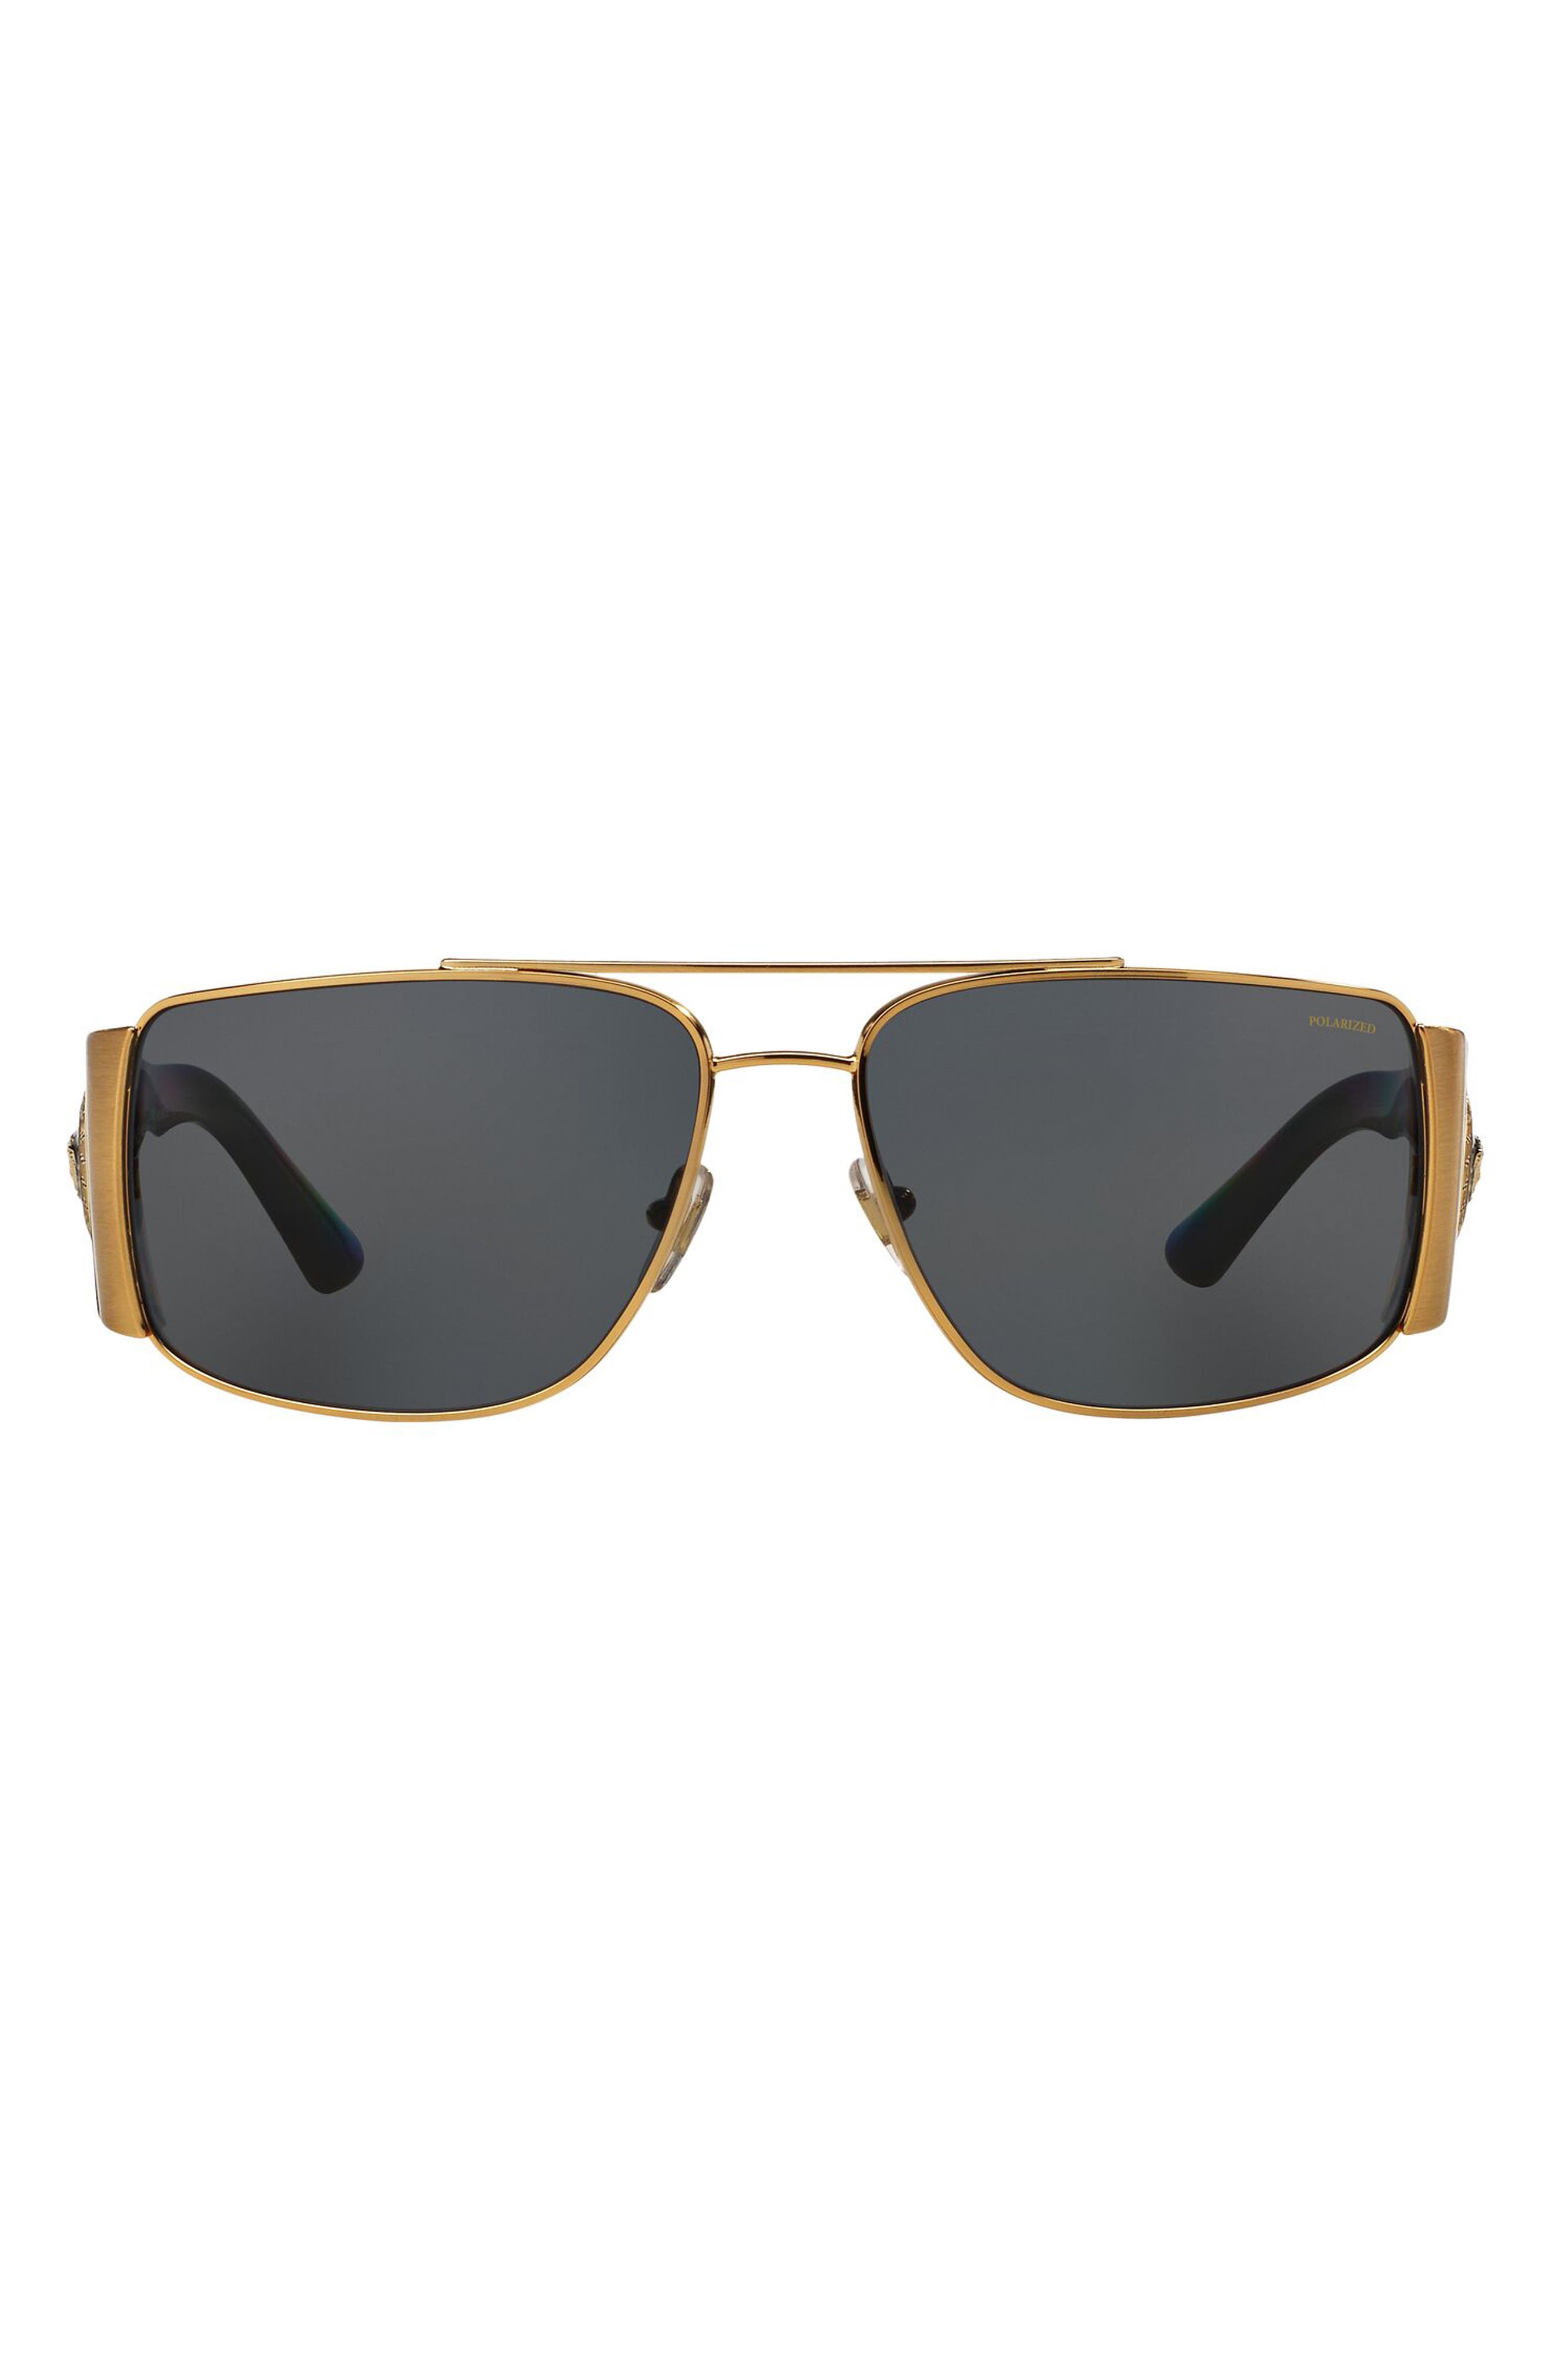 Versace 63mm Polarized Oversize Rectangular Sunglasses in Gold/Grey at Nordstrom